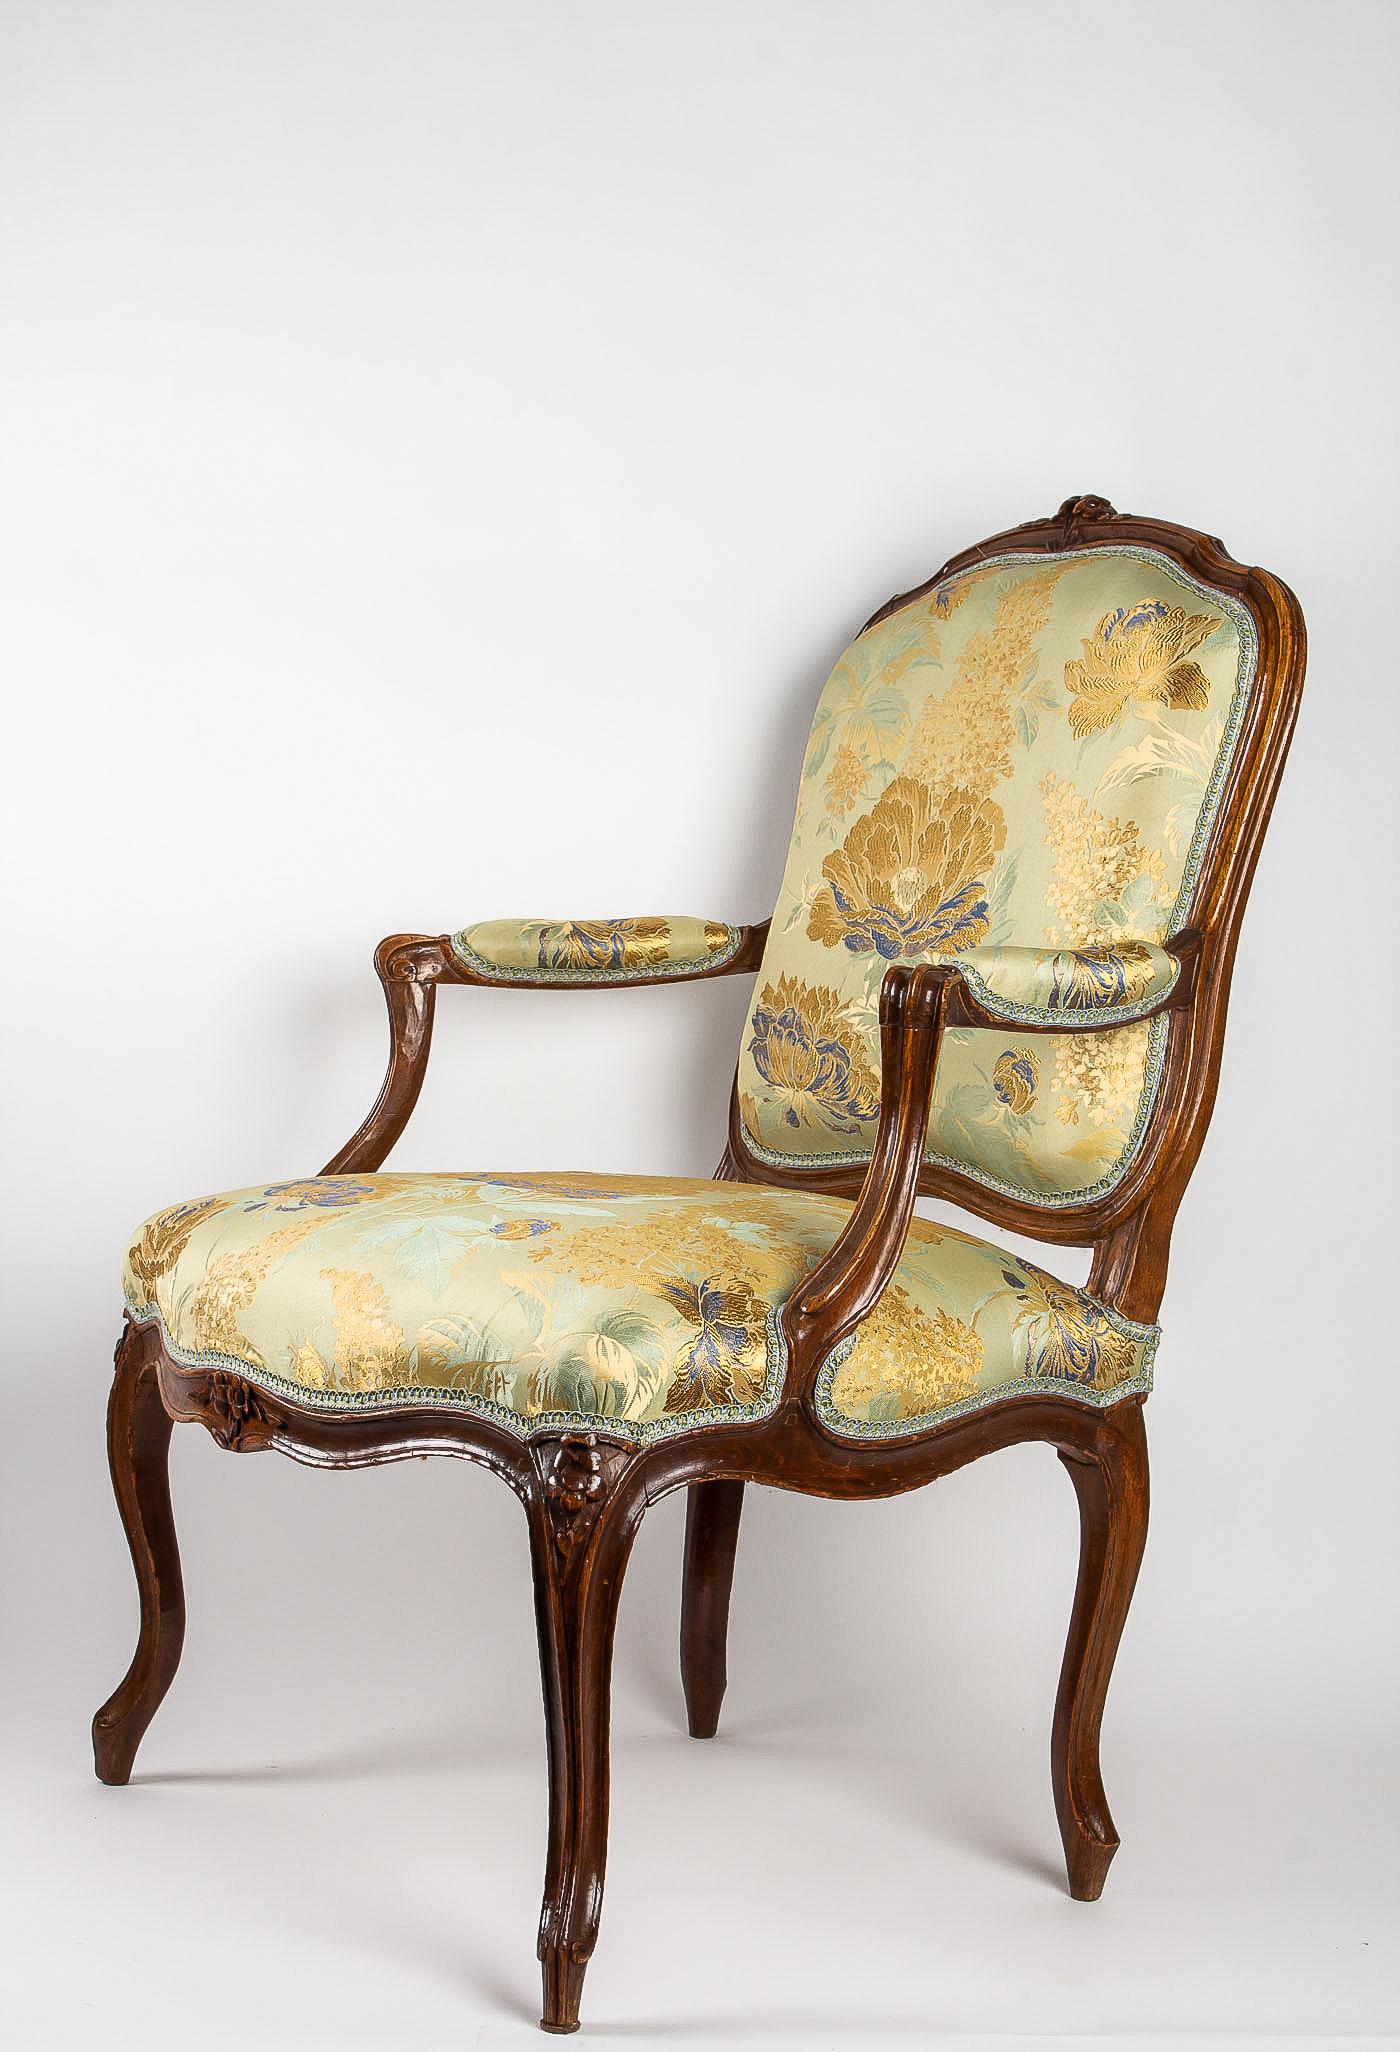 French Louis XV Period Set of 4 of Large Armchairs, circa 1766-1770 by Louis Delanois